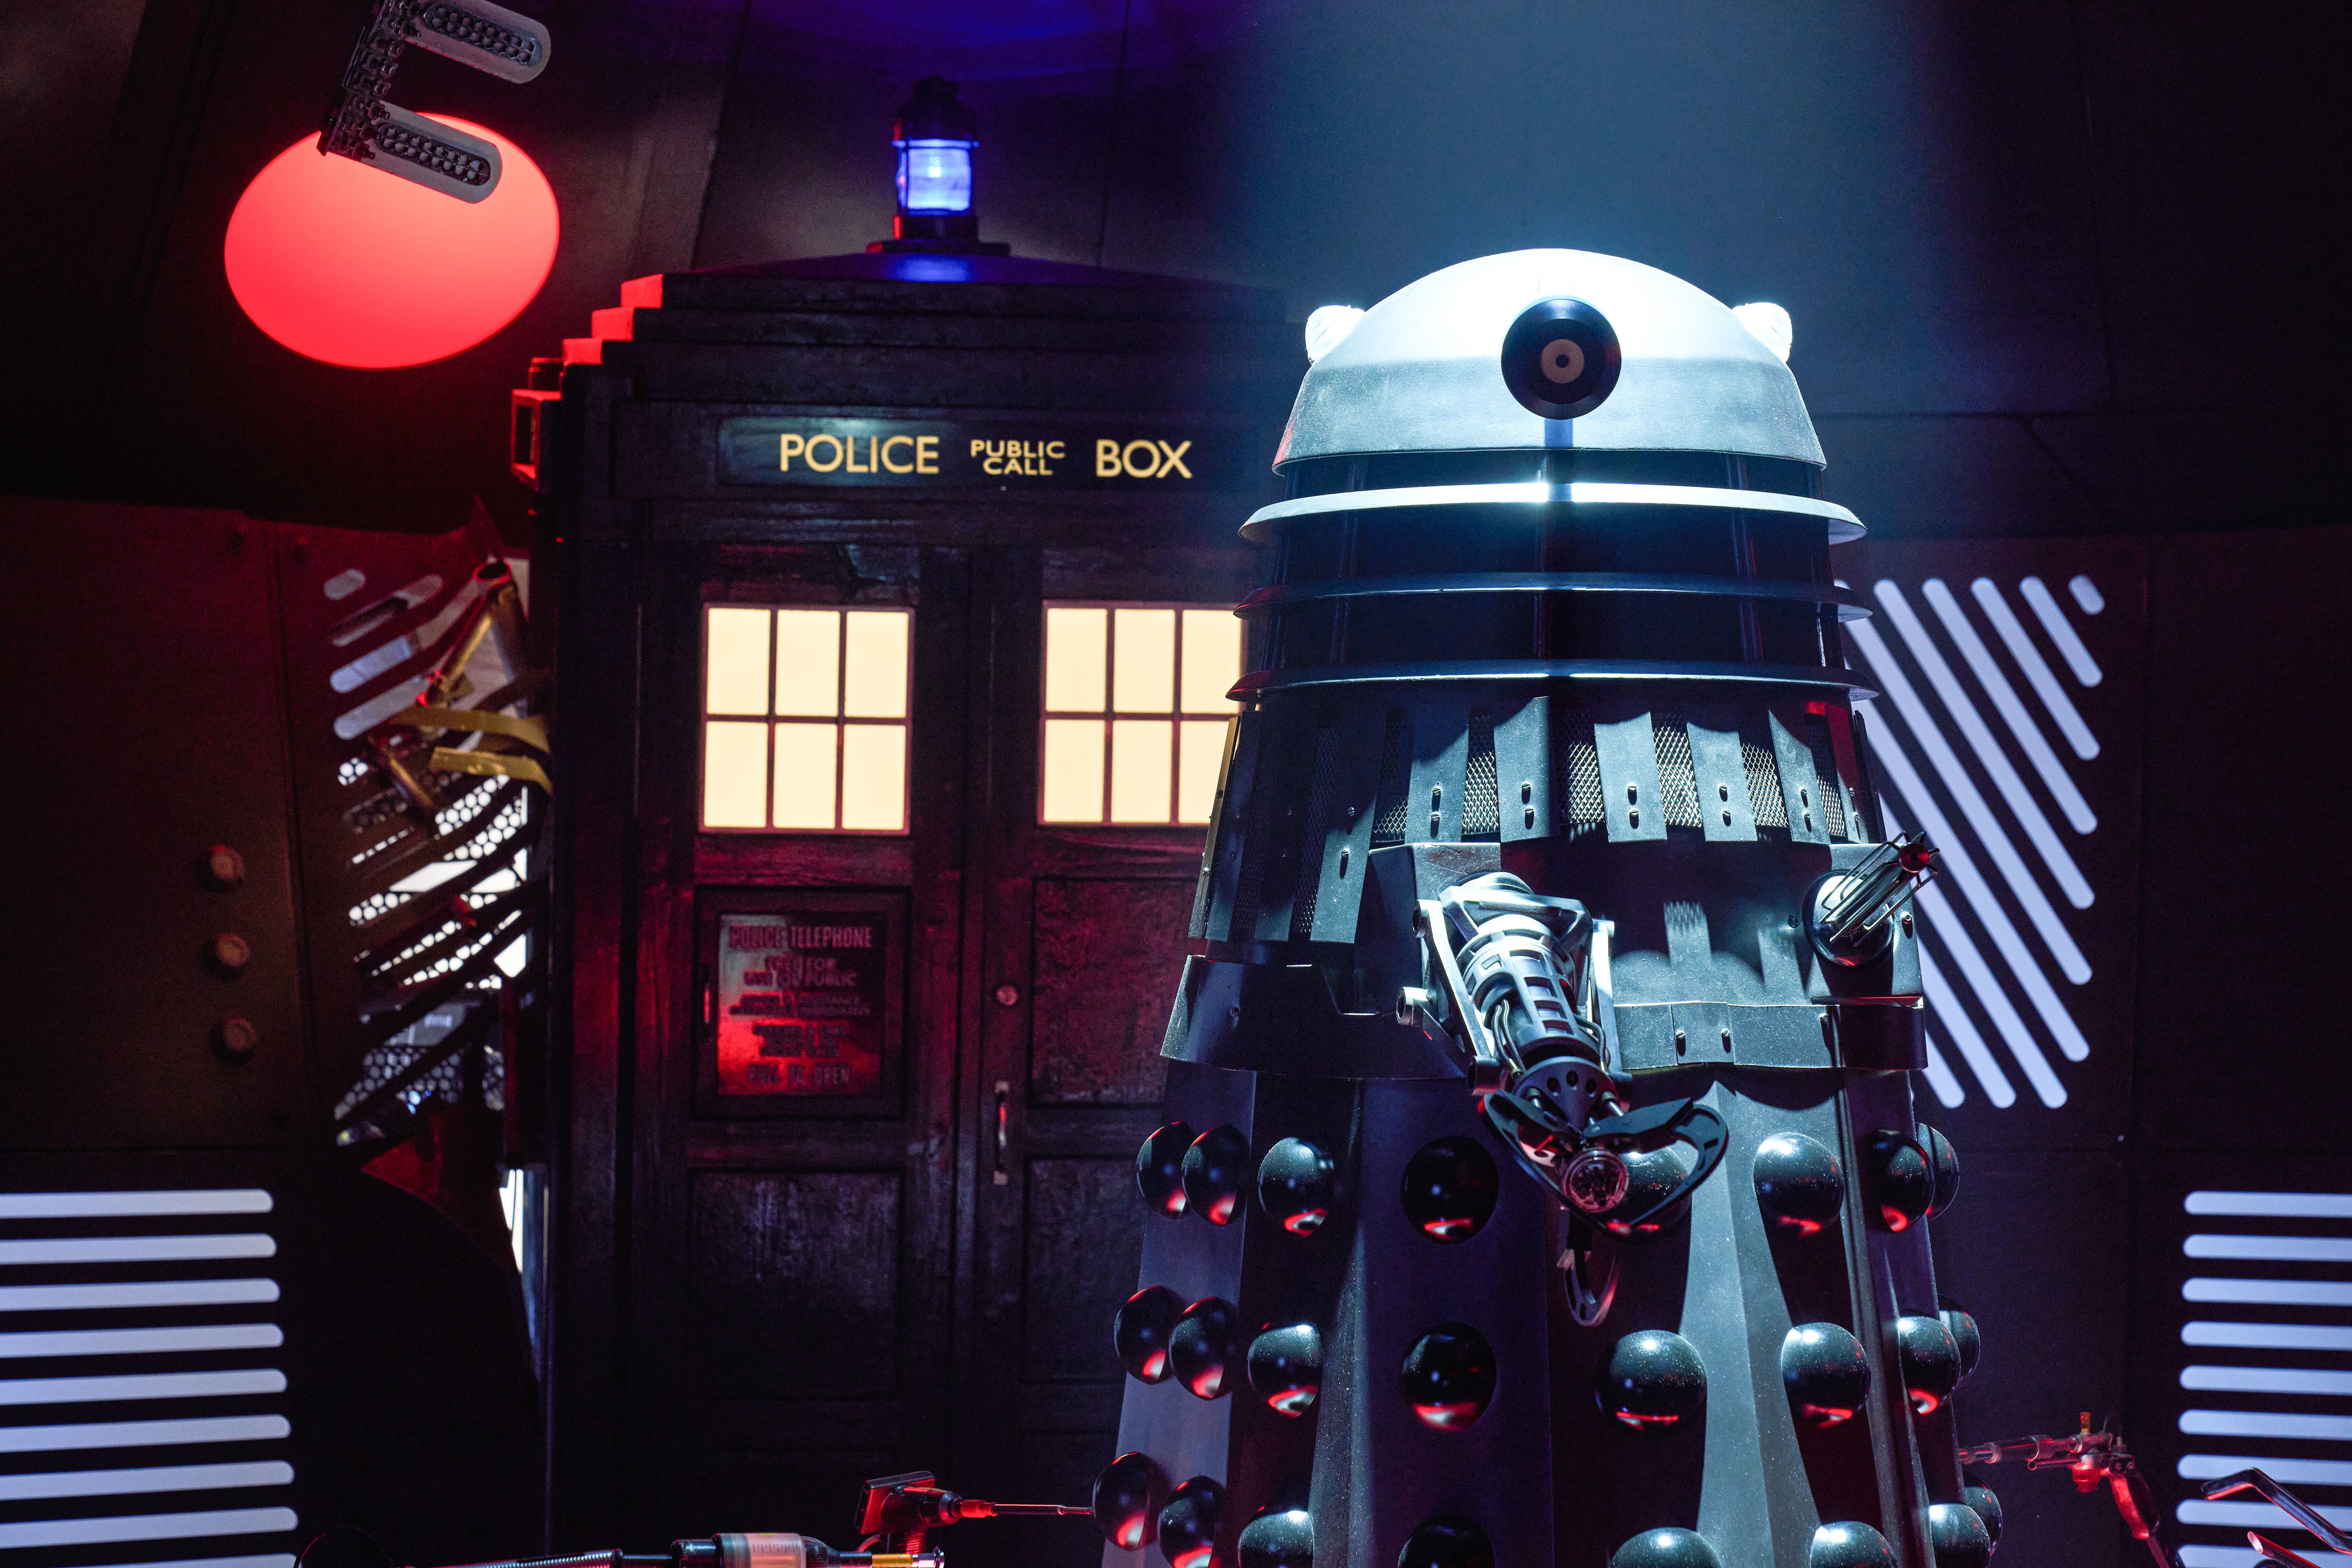 A Dalek in front of the TARDIS.